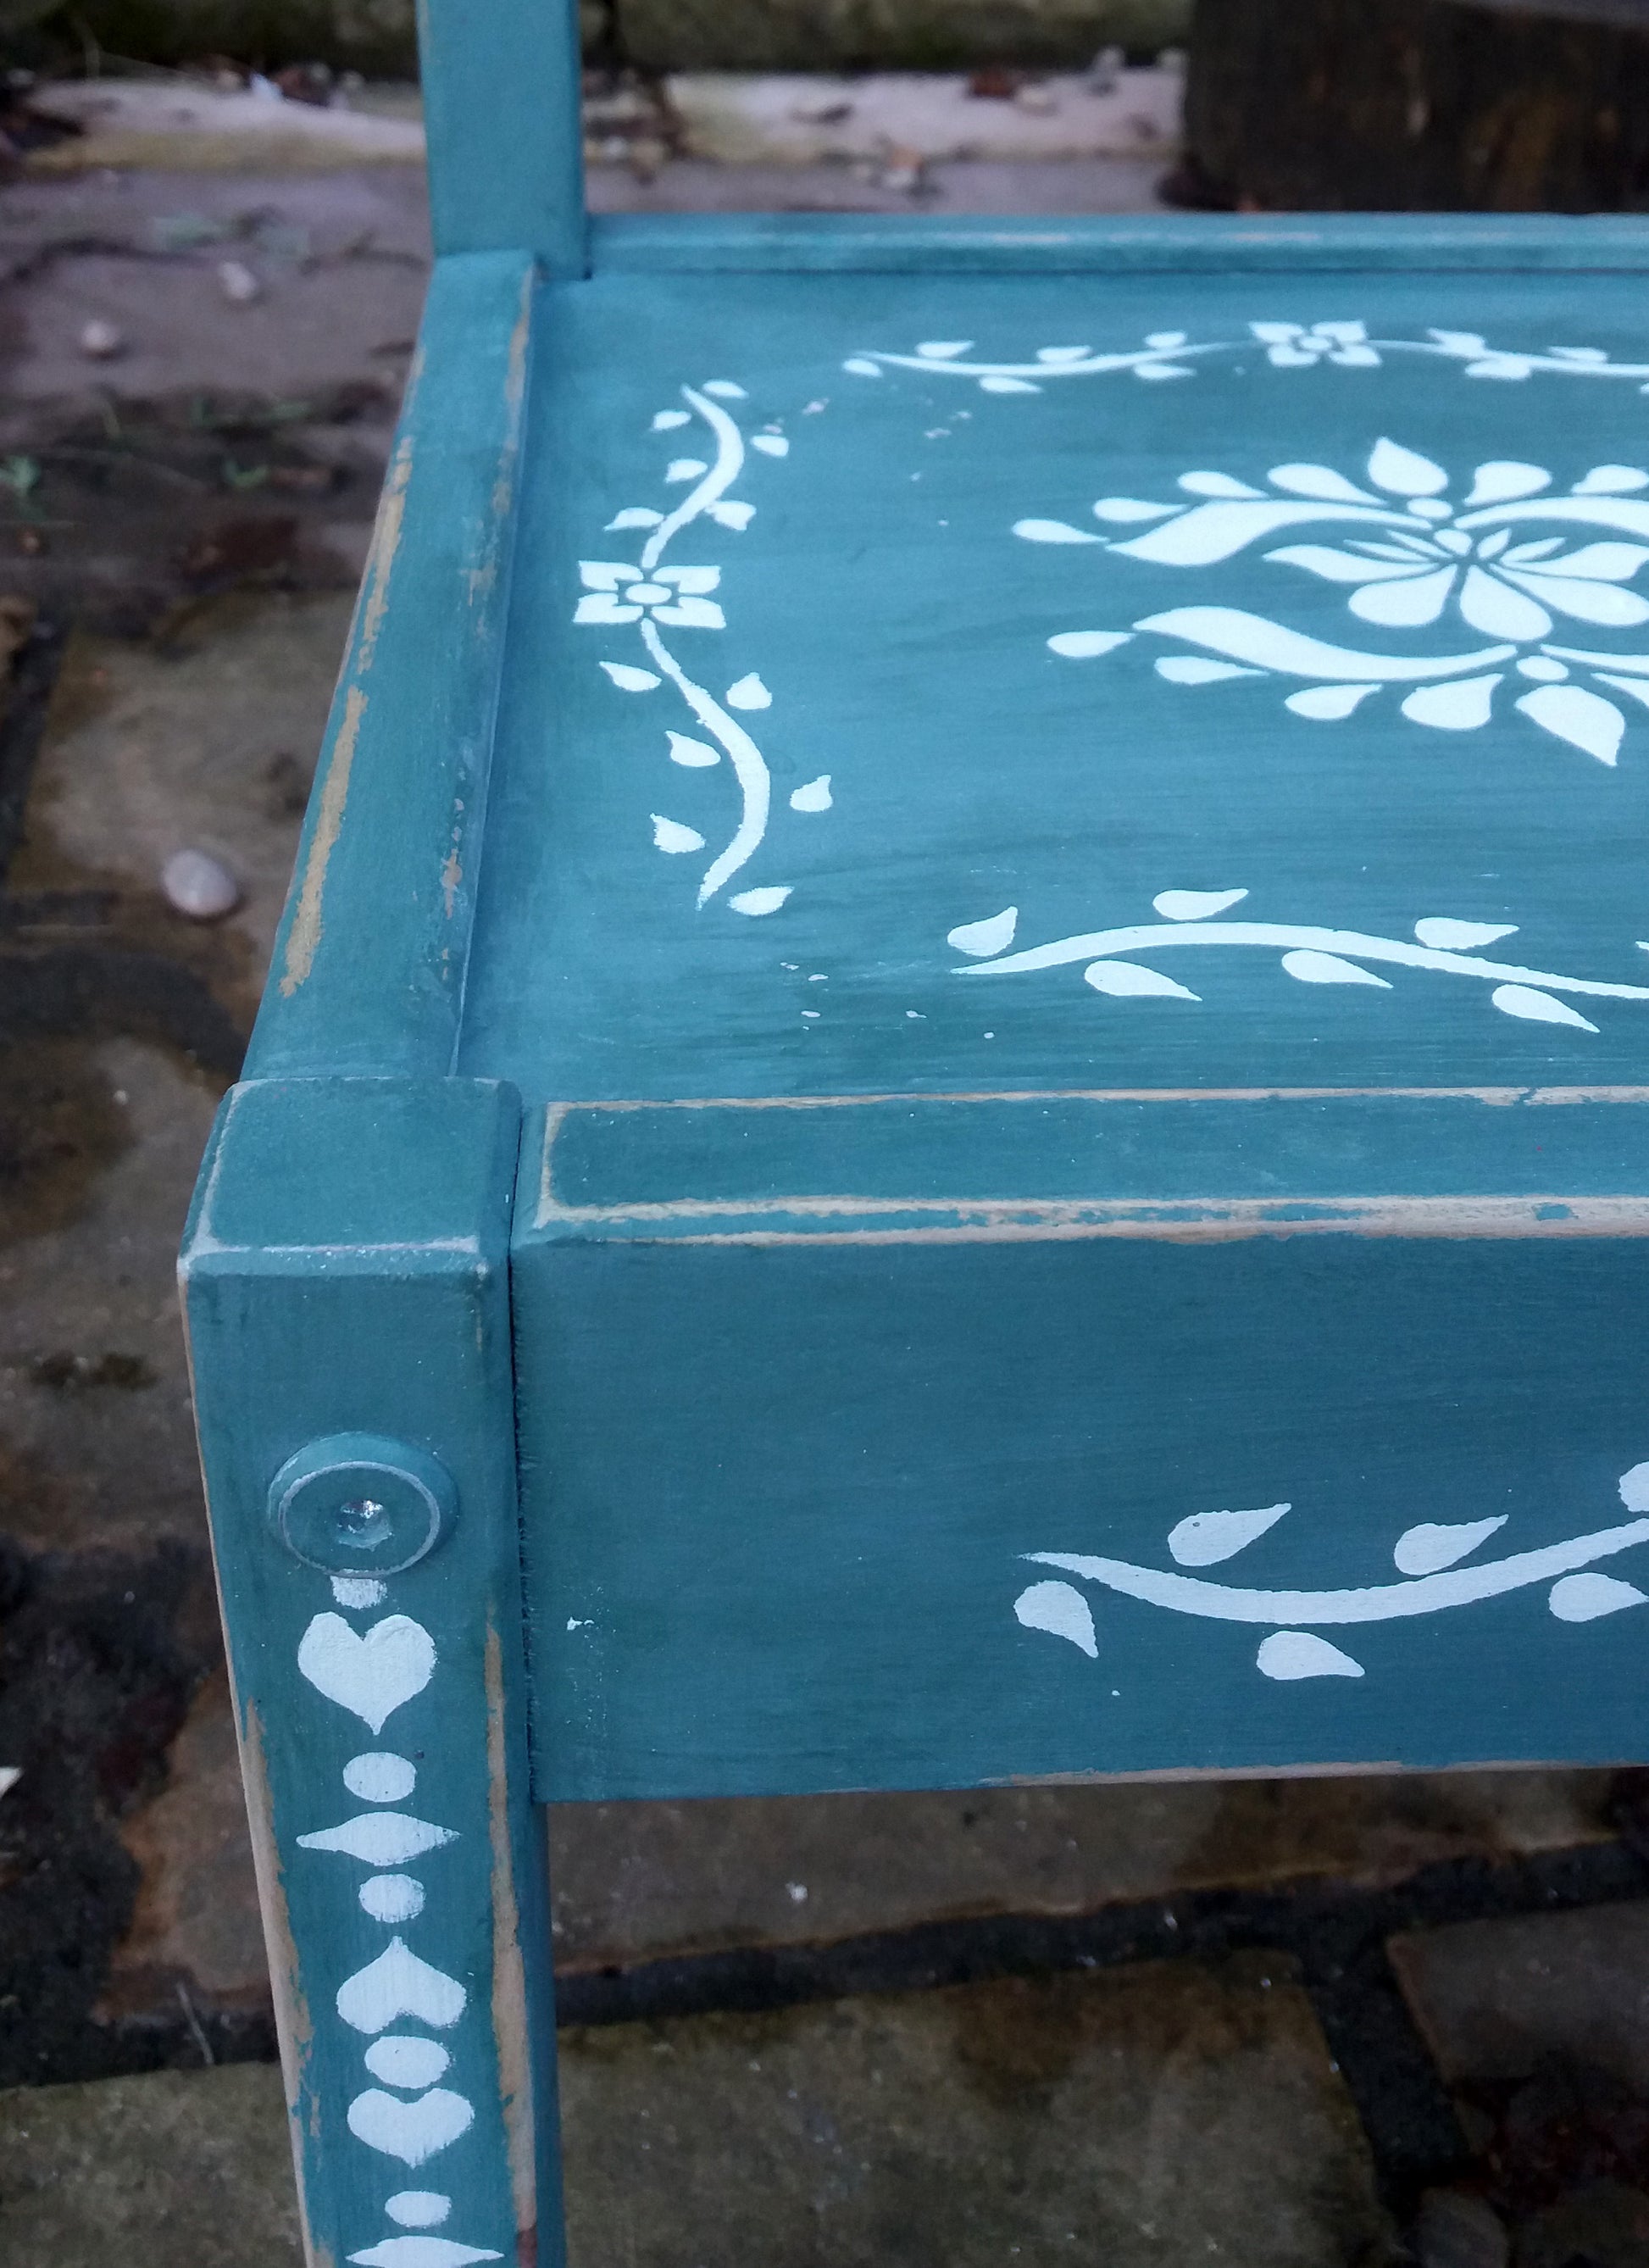 Little Children's chair painted in a deep green with folk art stencil design in white